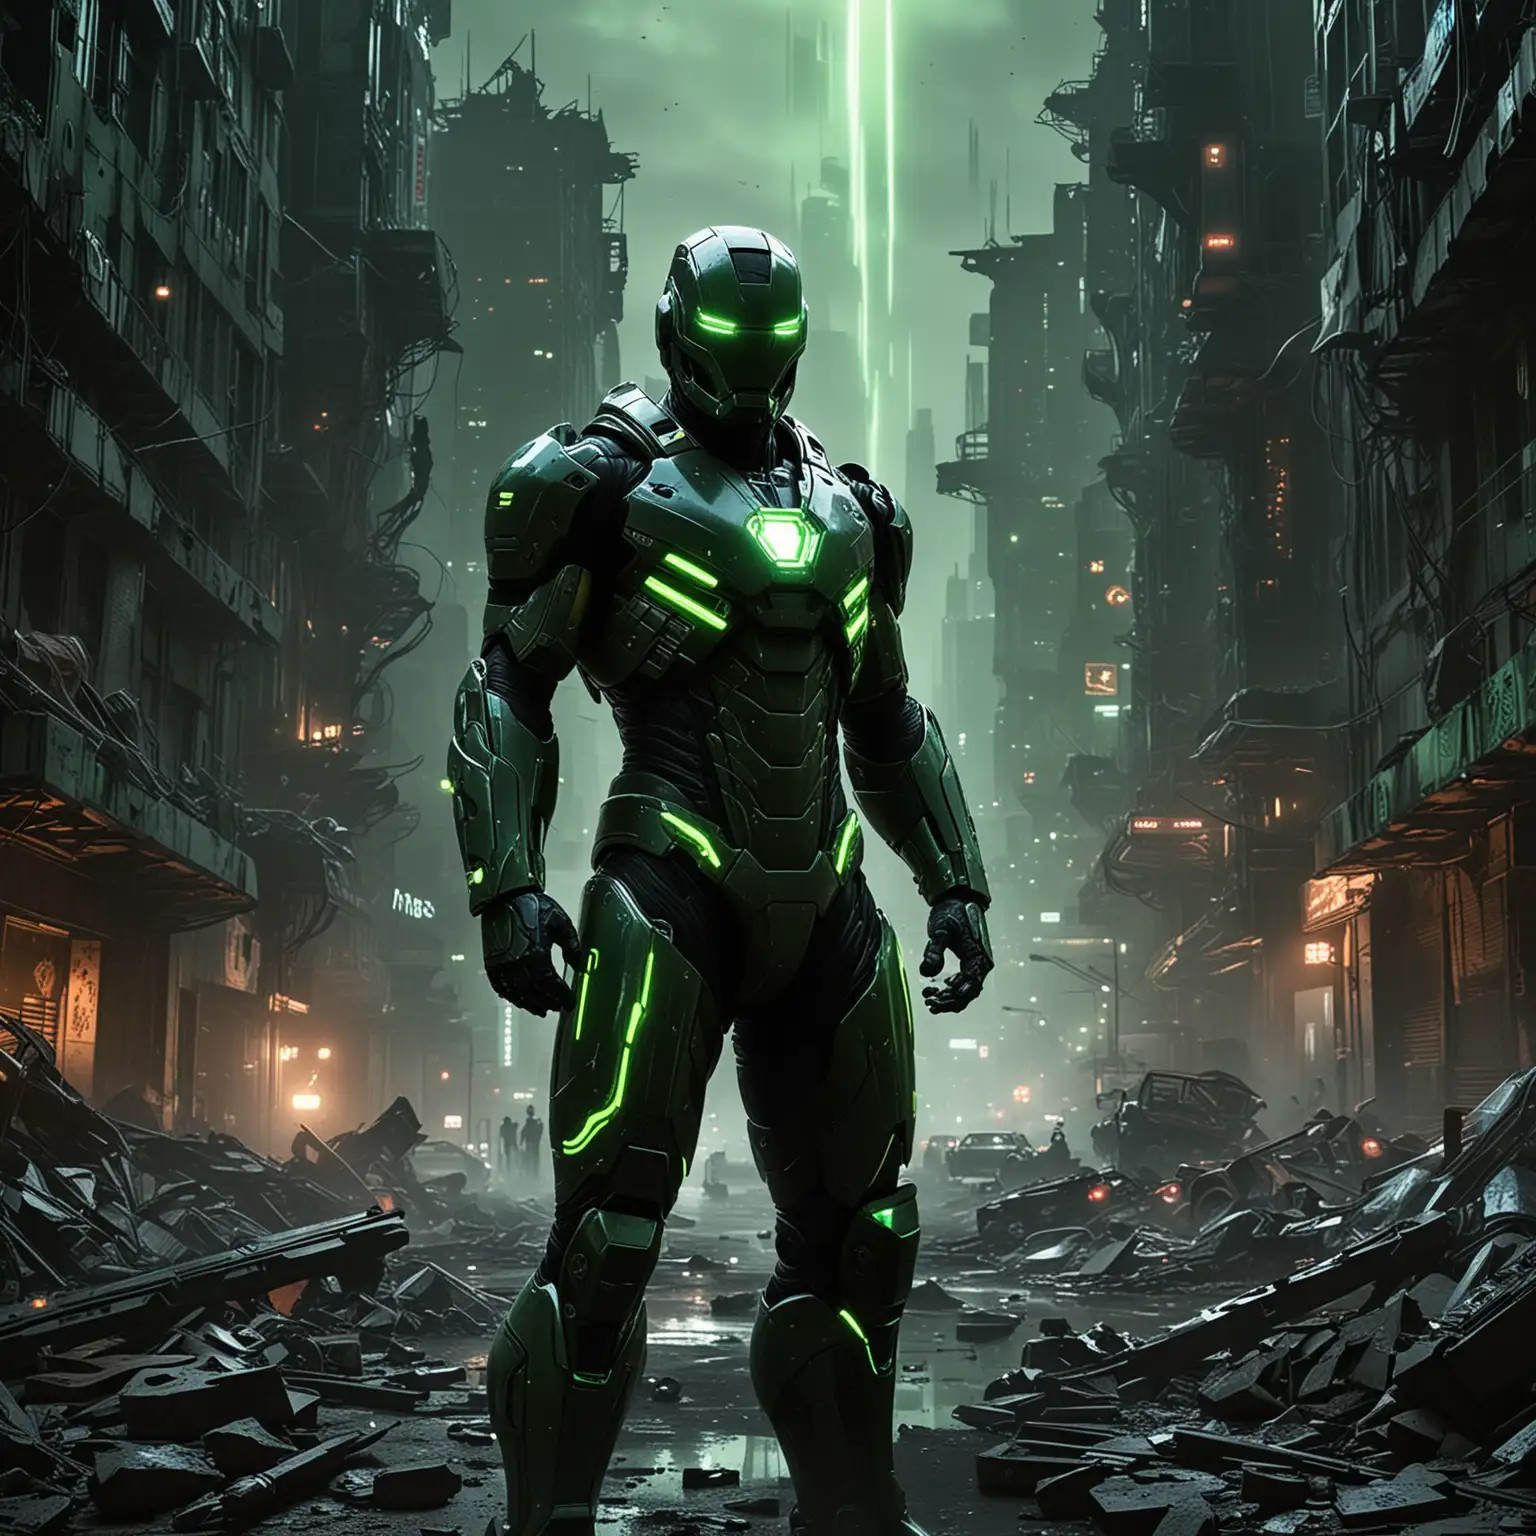 Imagine standing in the heart of a sprawling city on Saturn, where the night is alight with an eerie glow from bright green neon lights. This city, known for its stark brutalist architecture, presents a dramatic backdrop against the dark sky of the outer solar system. You are in the center of this chaotic beauty, clad in the Iron Man Mark 33 suit, but with a unique twist: your suit is a sleek combination of green and black, reflecting the neon glow of the city. The helmet's faceplate is open, revealing your determined expression as you prepare for battle. Your hand is outstretched, ready to unleash the power of the suit's pulsar weapon.  Around you, the city tells a story of recent conflict: many buildings bear the scars of destruction, with smoke billowing from their ruins and flames consuming what remains. Some structures stand partially demolished, a testament to the ferocity of the unseen battle. Despite the destruction, the city's spirit is unbroken, mirrored by your own resolve. The green neon light casts dramatic shadows, emphasizing the contrast between the technological marvel you embody and the primal chaos around you.  As you stand ready, the energy of the moment is palpable, the air vibrating with anticipation. This is a scene of epic proportions, a snapshot of a hero ready to confront whatever challenges lie ahead in this otherworldly metropolis.